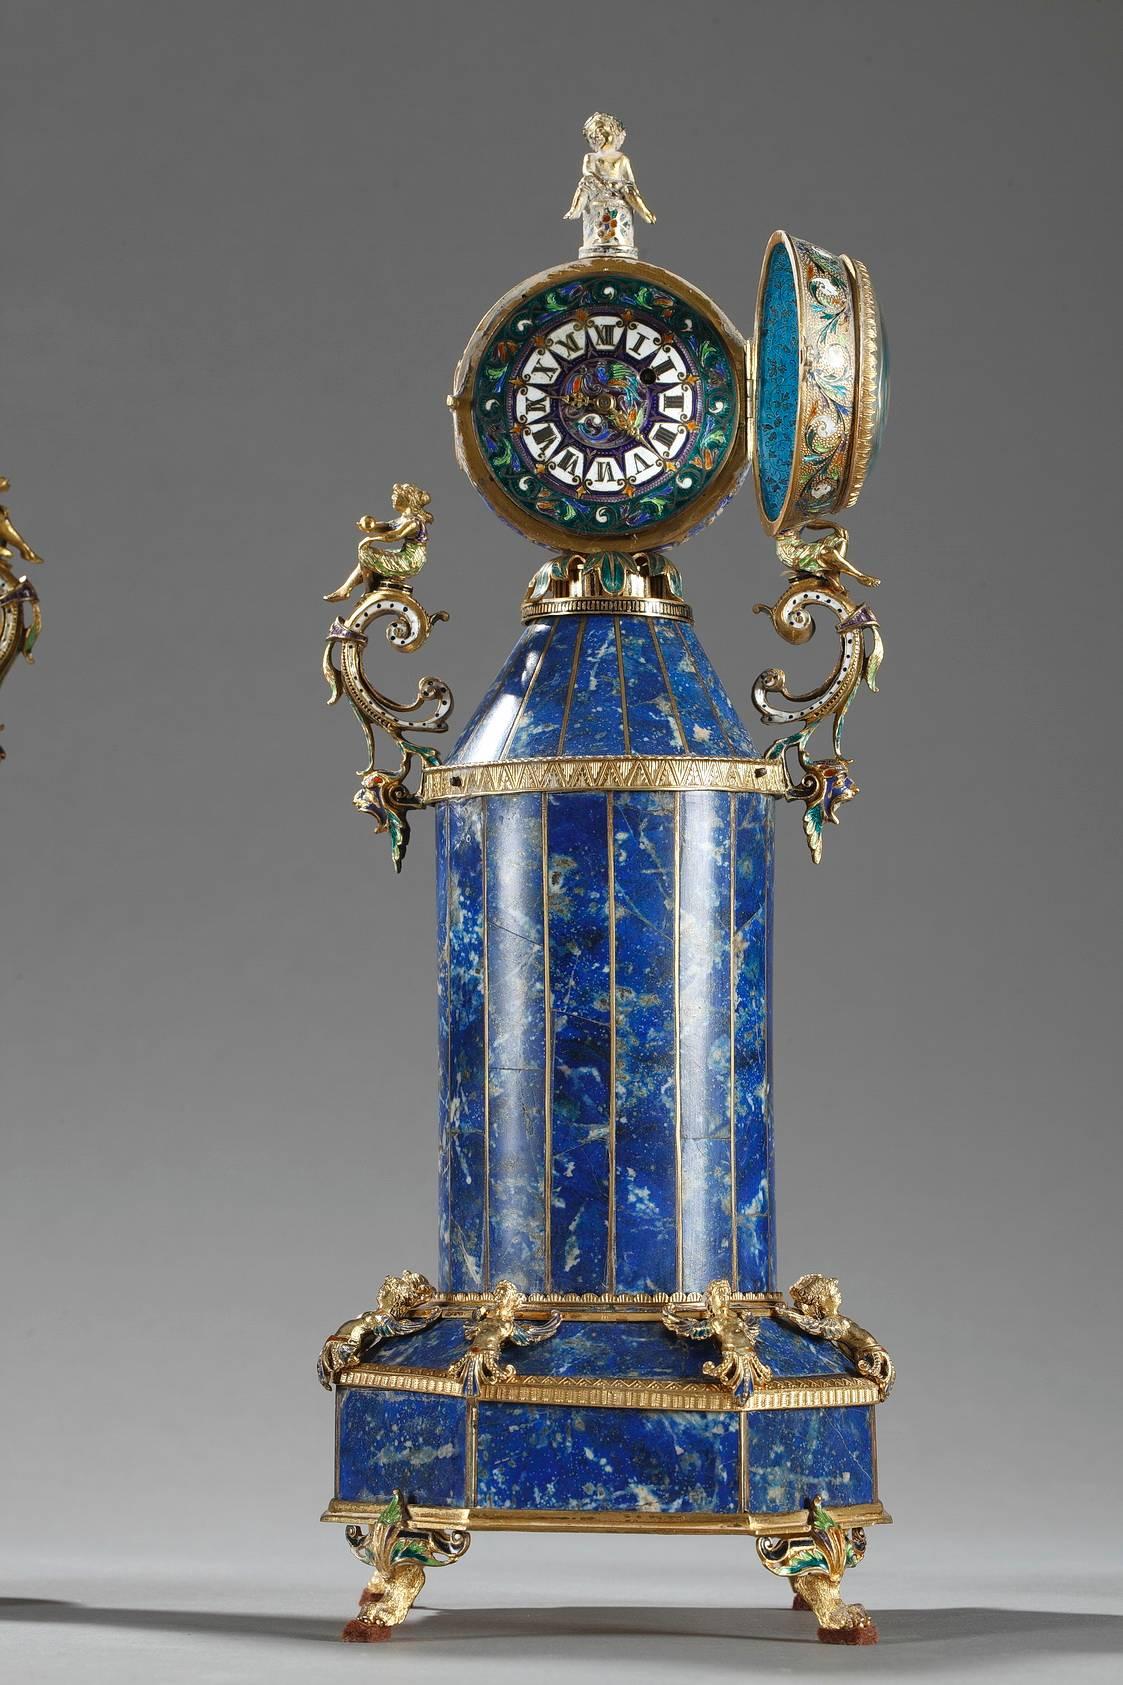 Austrian Clock with Vases in Lapis Lazuli and Silver, Vienna, 19th Century